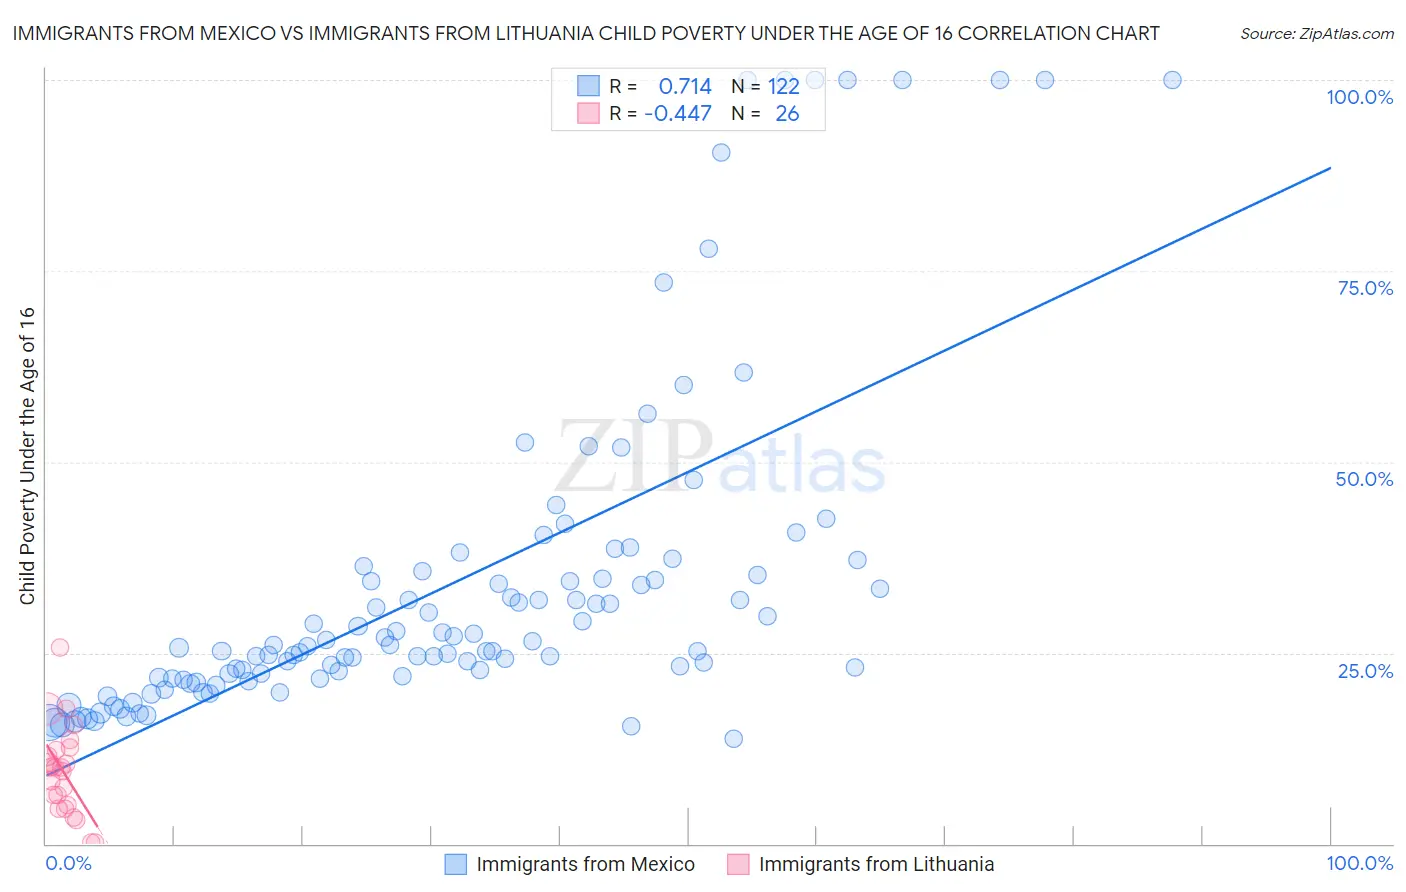 Immigrants from Mexico vs Immigrants from Lithuania Child Poverty Under the Age of 16